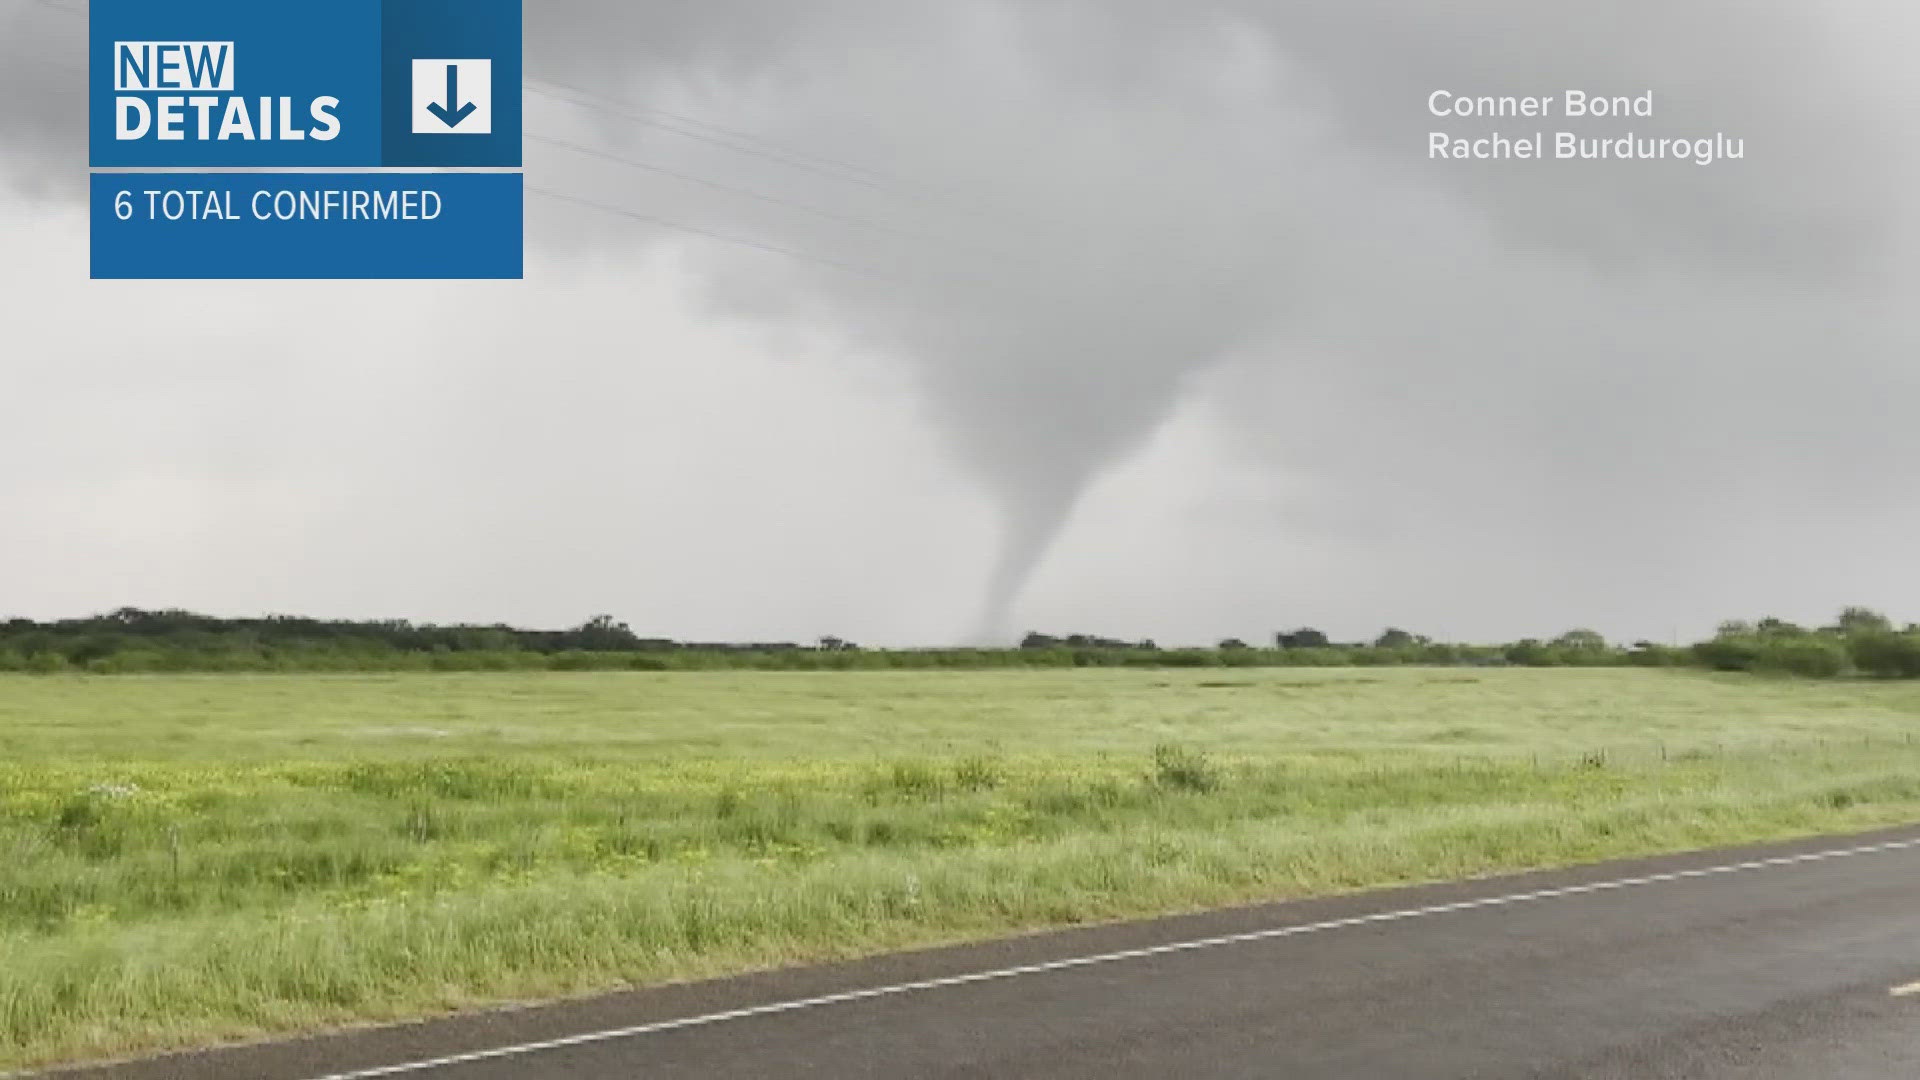 The NWS confirmed six tornados touched down Friday.